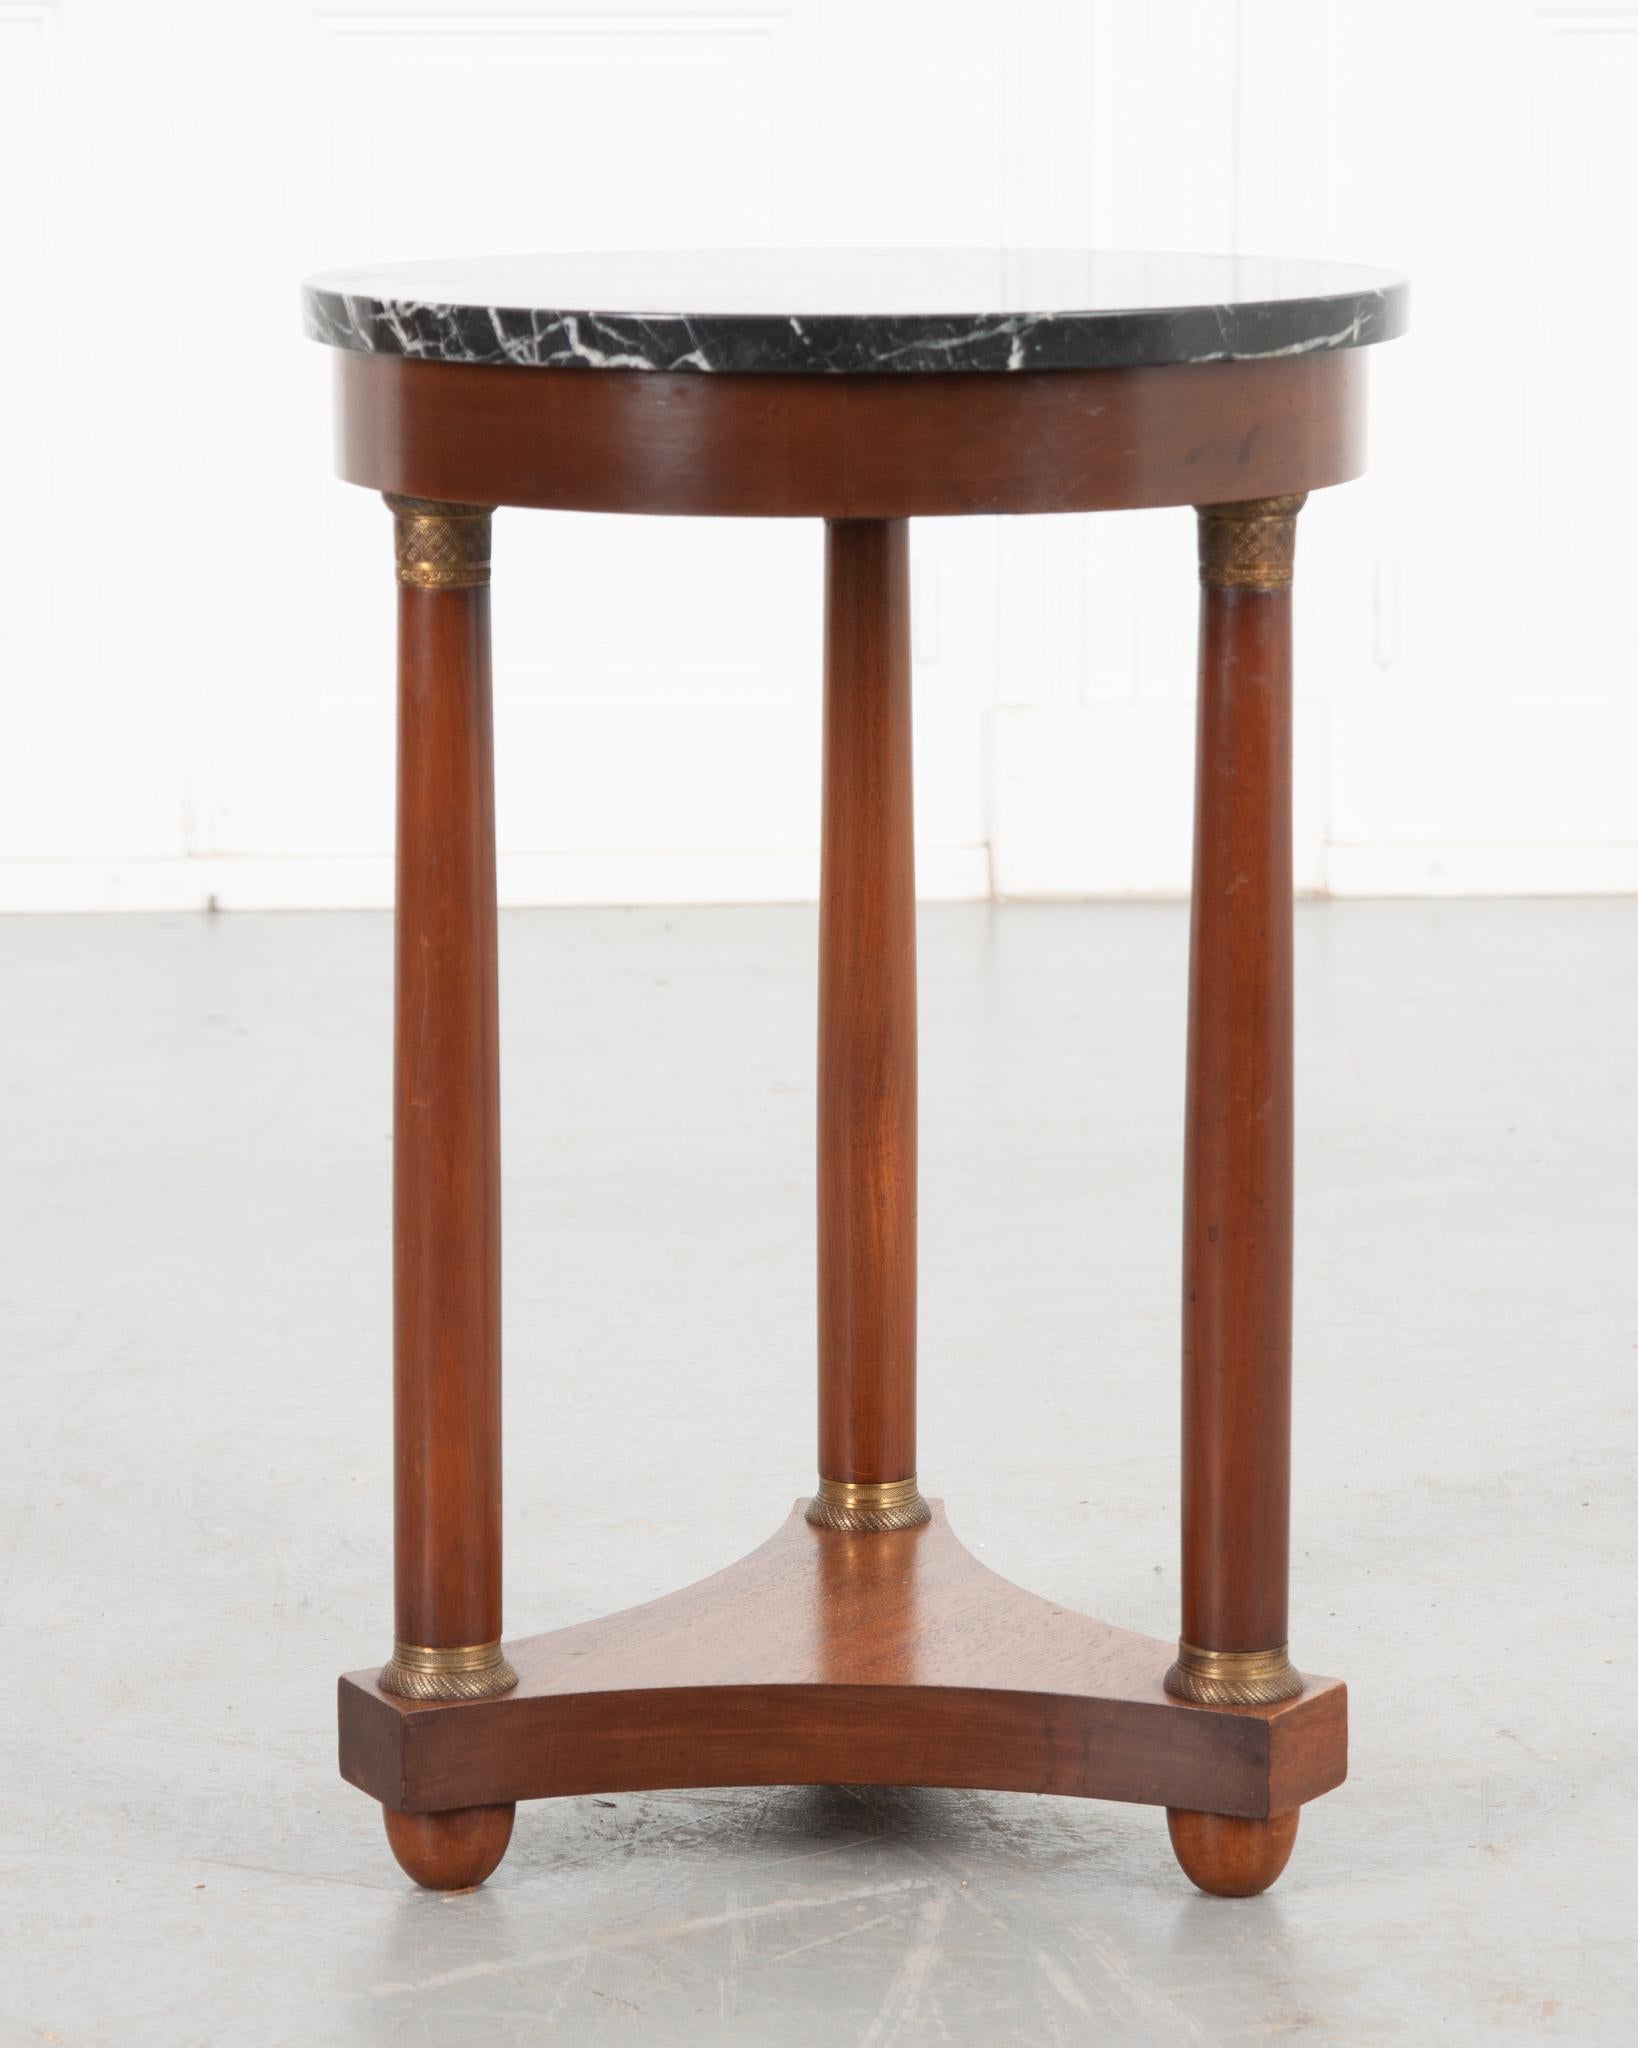 This darling petite 19th century Empire gueridon is the perfect addition to any home decor style! Beautiful black marble in great condition tops the rich mahogany base. Three turned column-like supports, each with highly decorative gilded ormolu